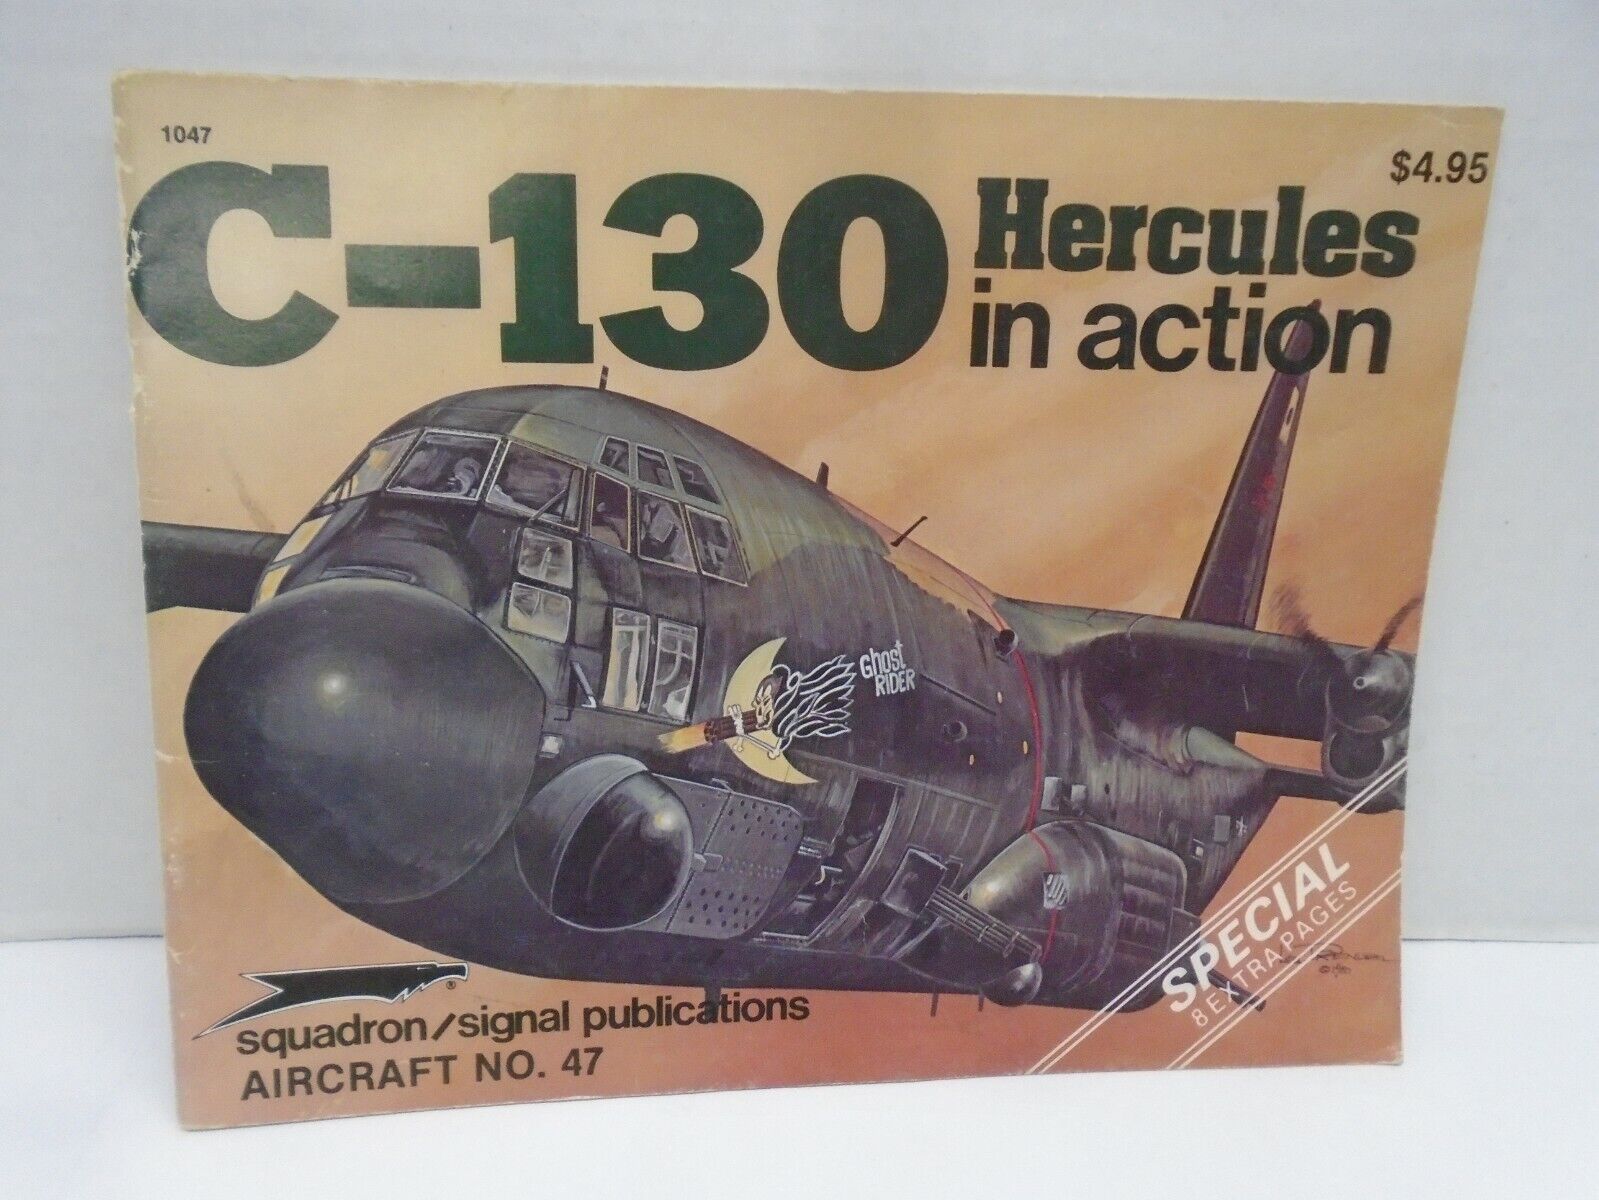 SQUADRON SIGNAL PUBLICATIONS AIRCRAFT #47 C-130 HERCULES IN ACTION #1047